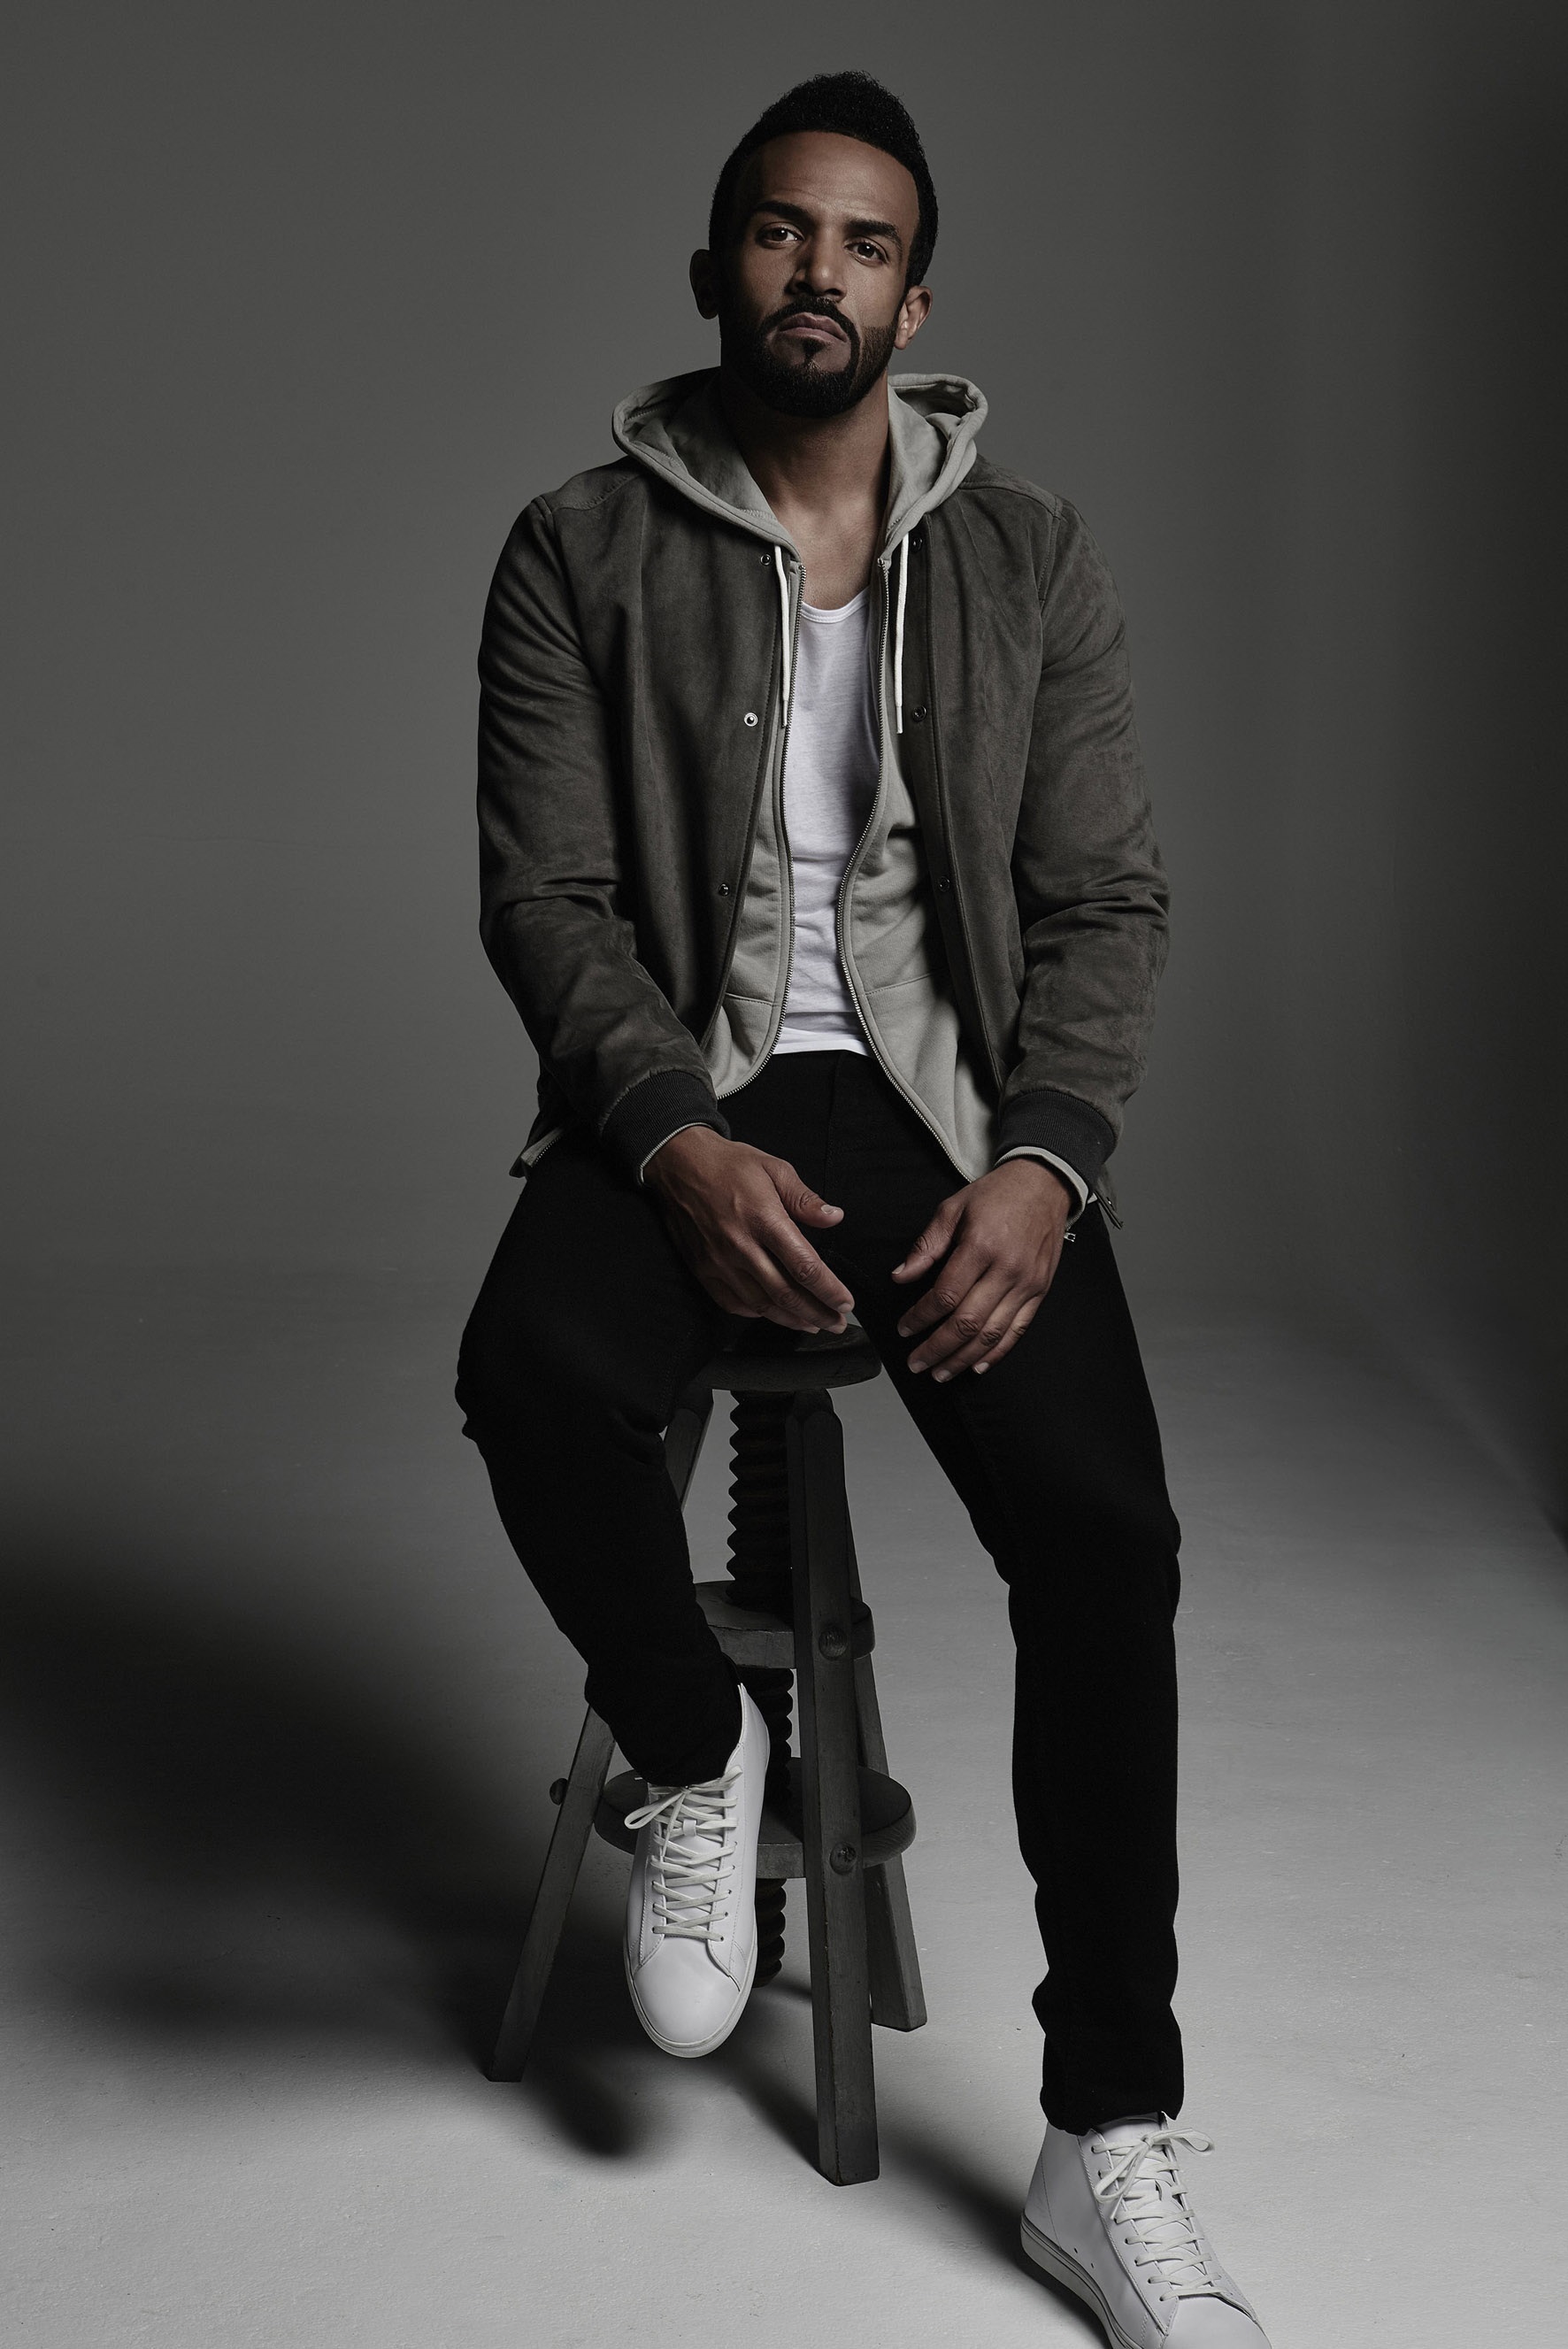 Craig David announces Dalby Forest date; ticket details here - The Northern Echo (registration)